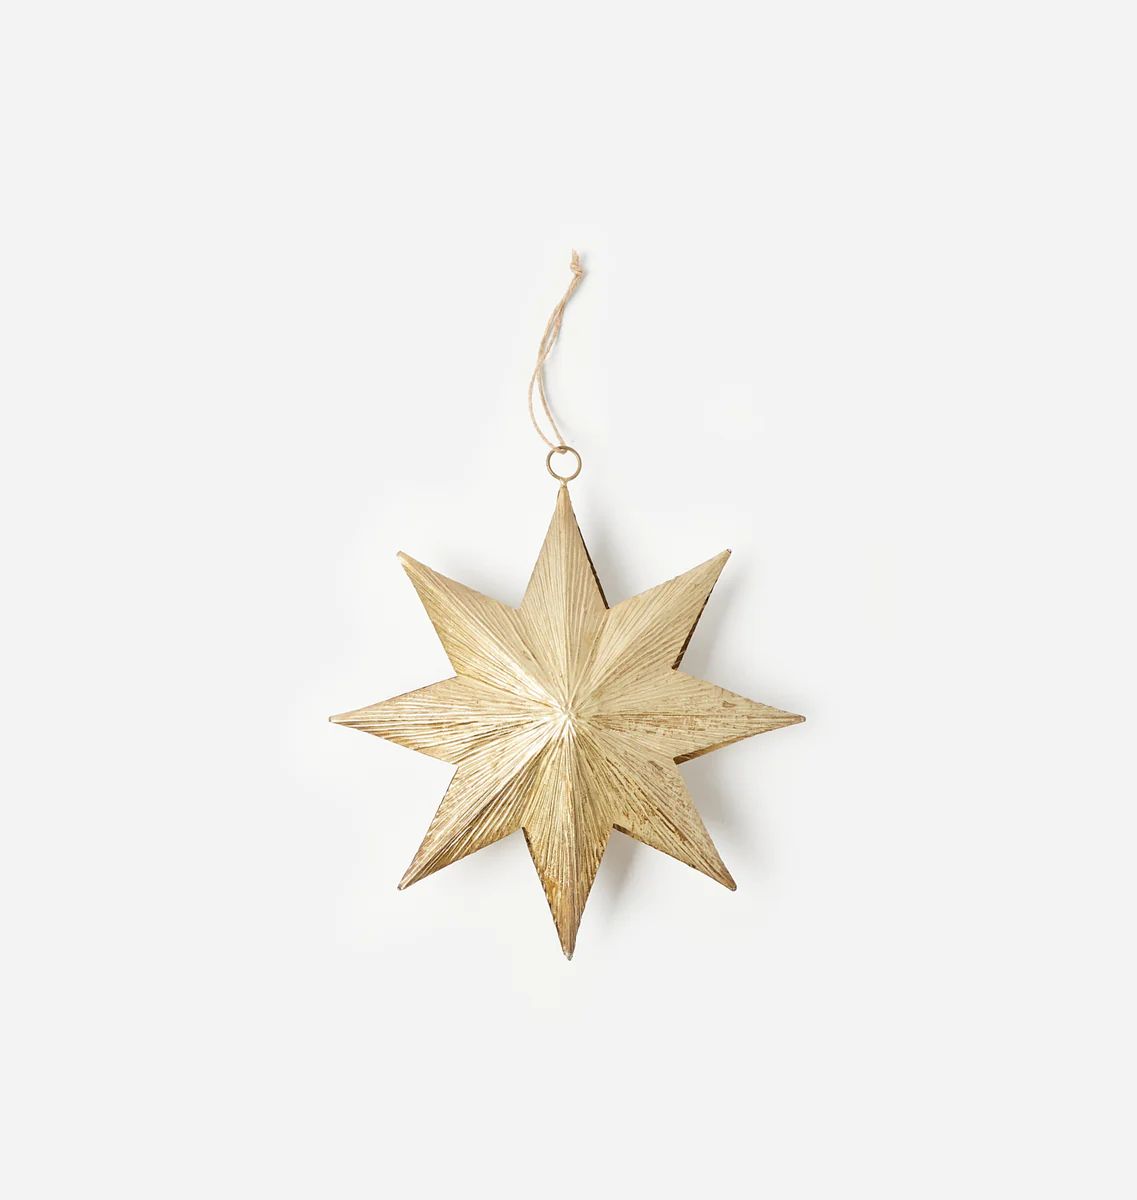 Antique Two-Sided Star Ornament | Amber Interiors